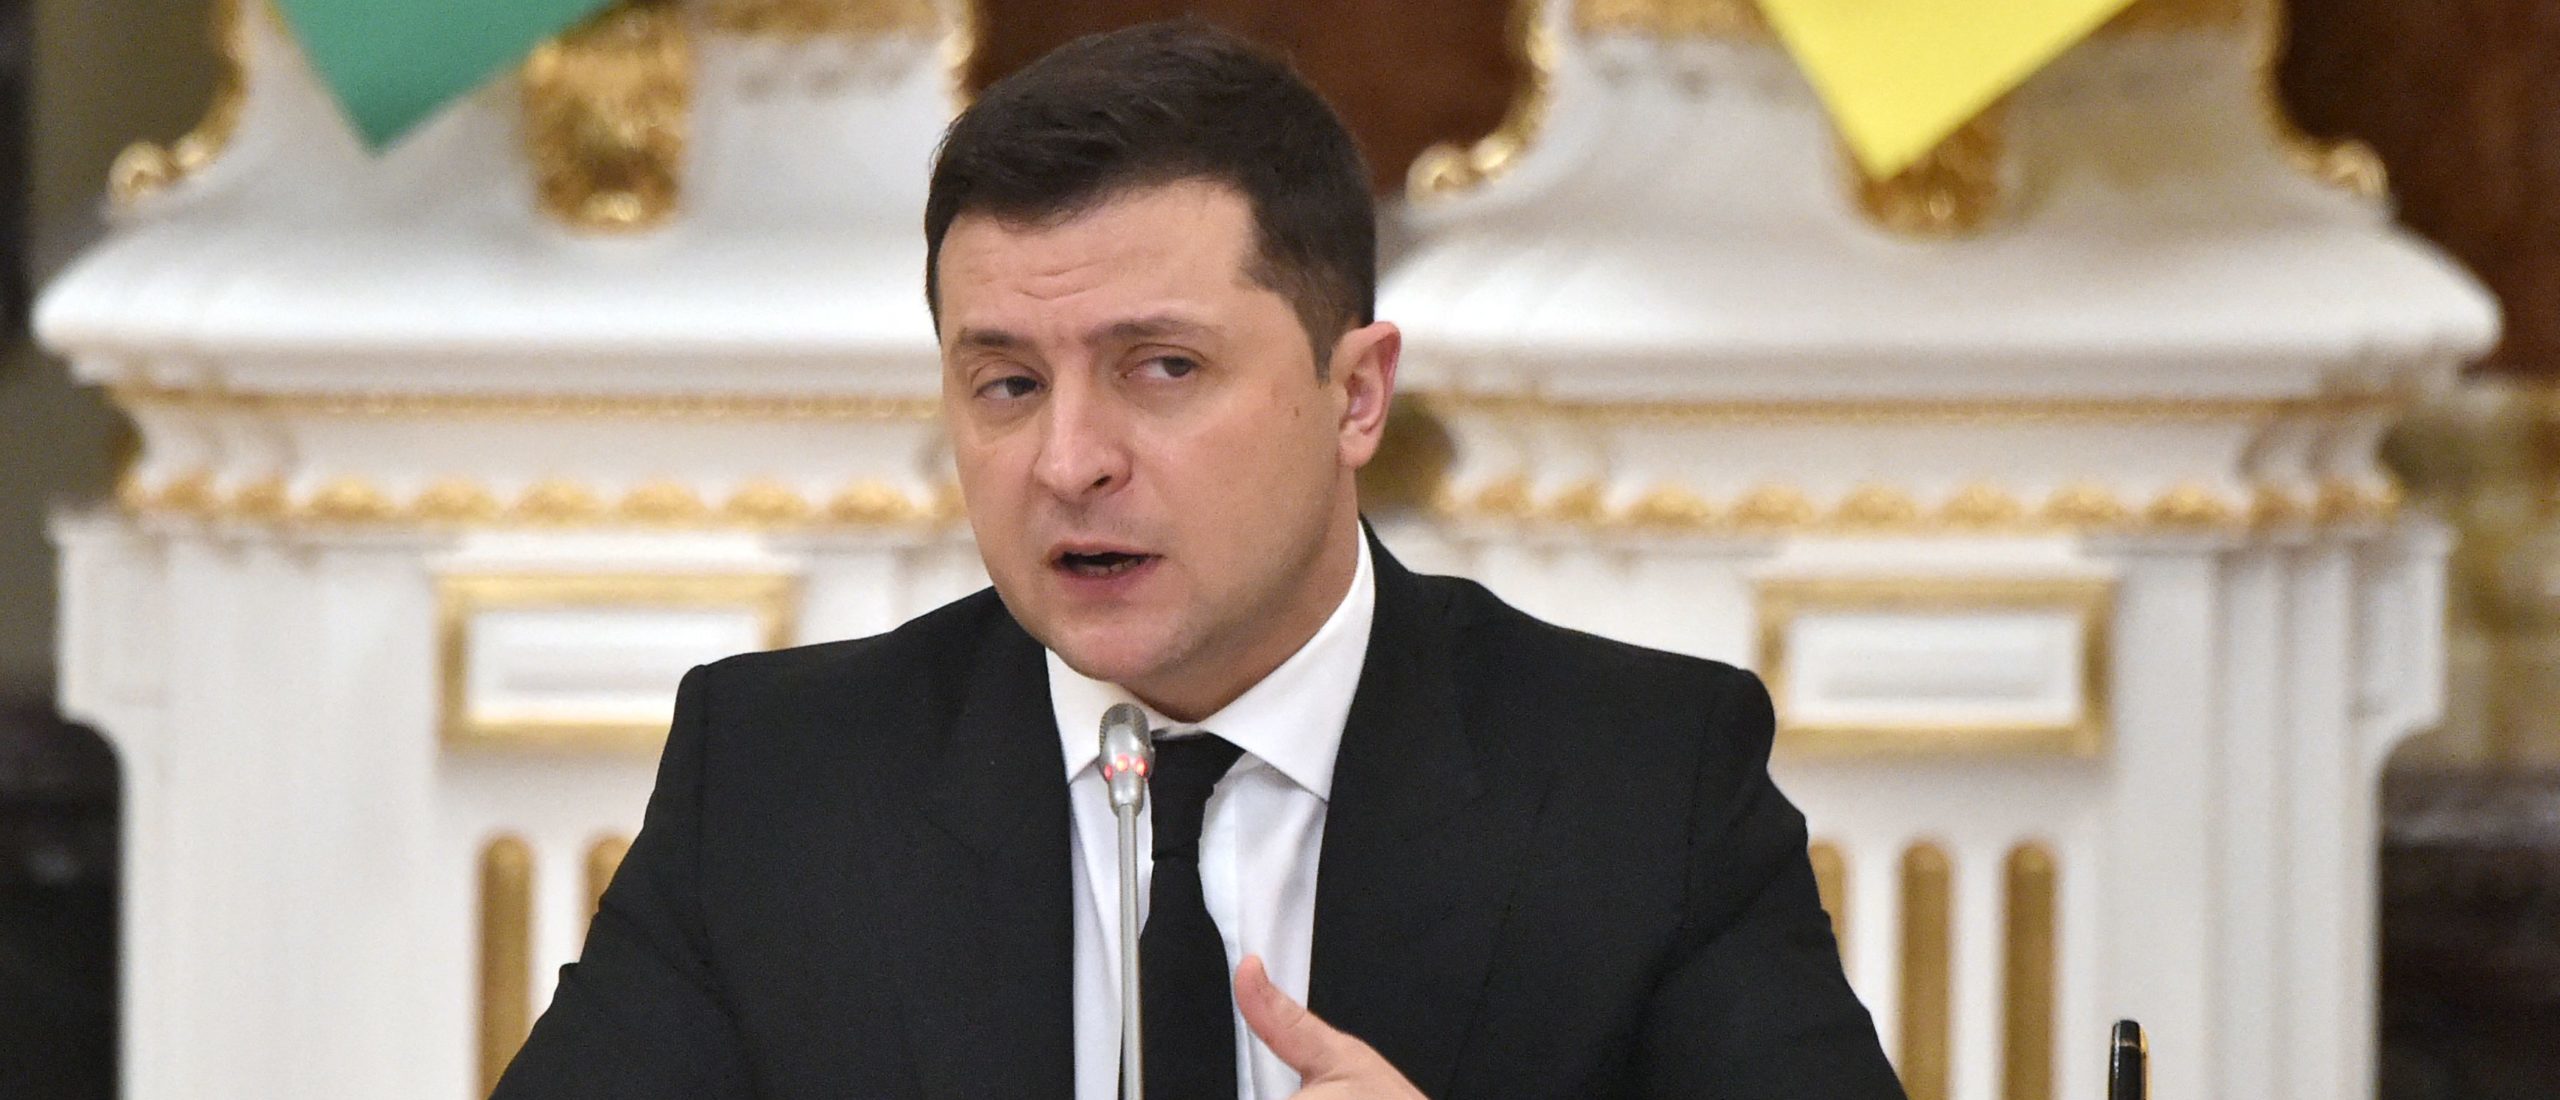 Ukraine Insists Russian Invasion Is Not Imminent